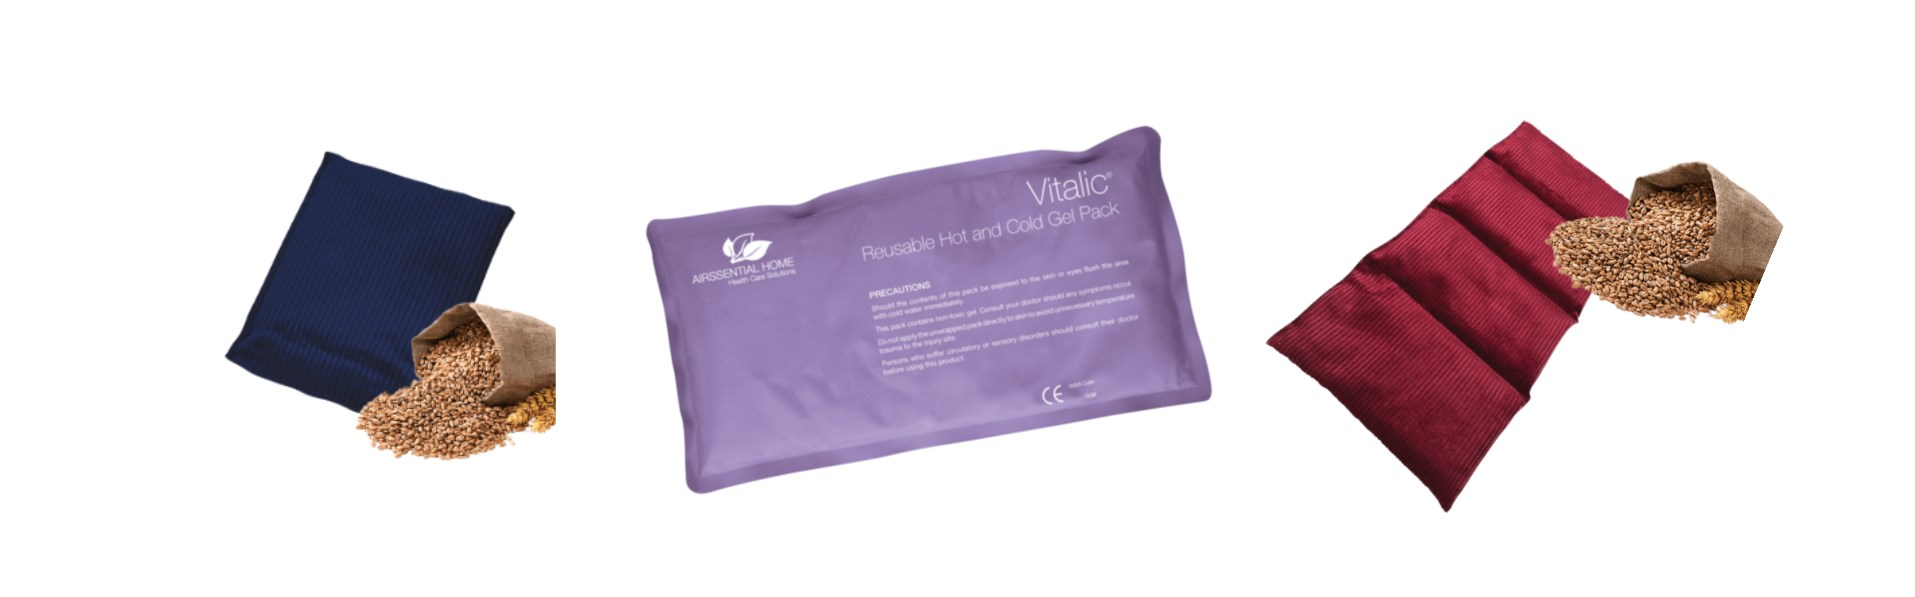 Gel Packs and Wheat Bags - Airssential Health Care